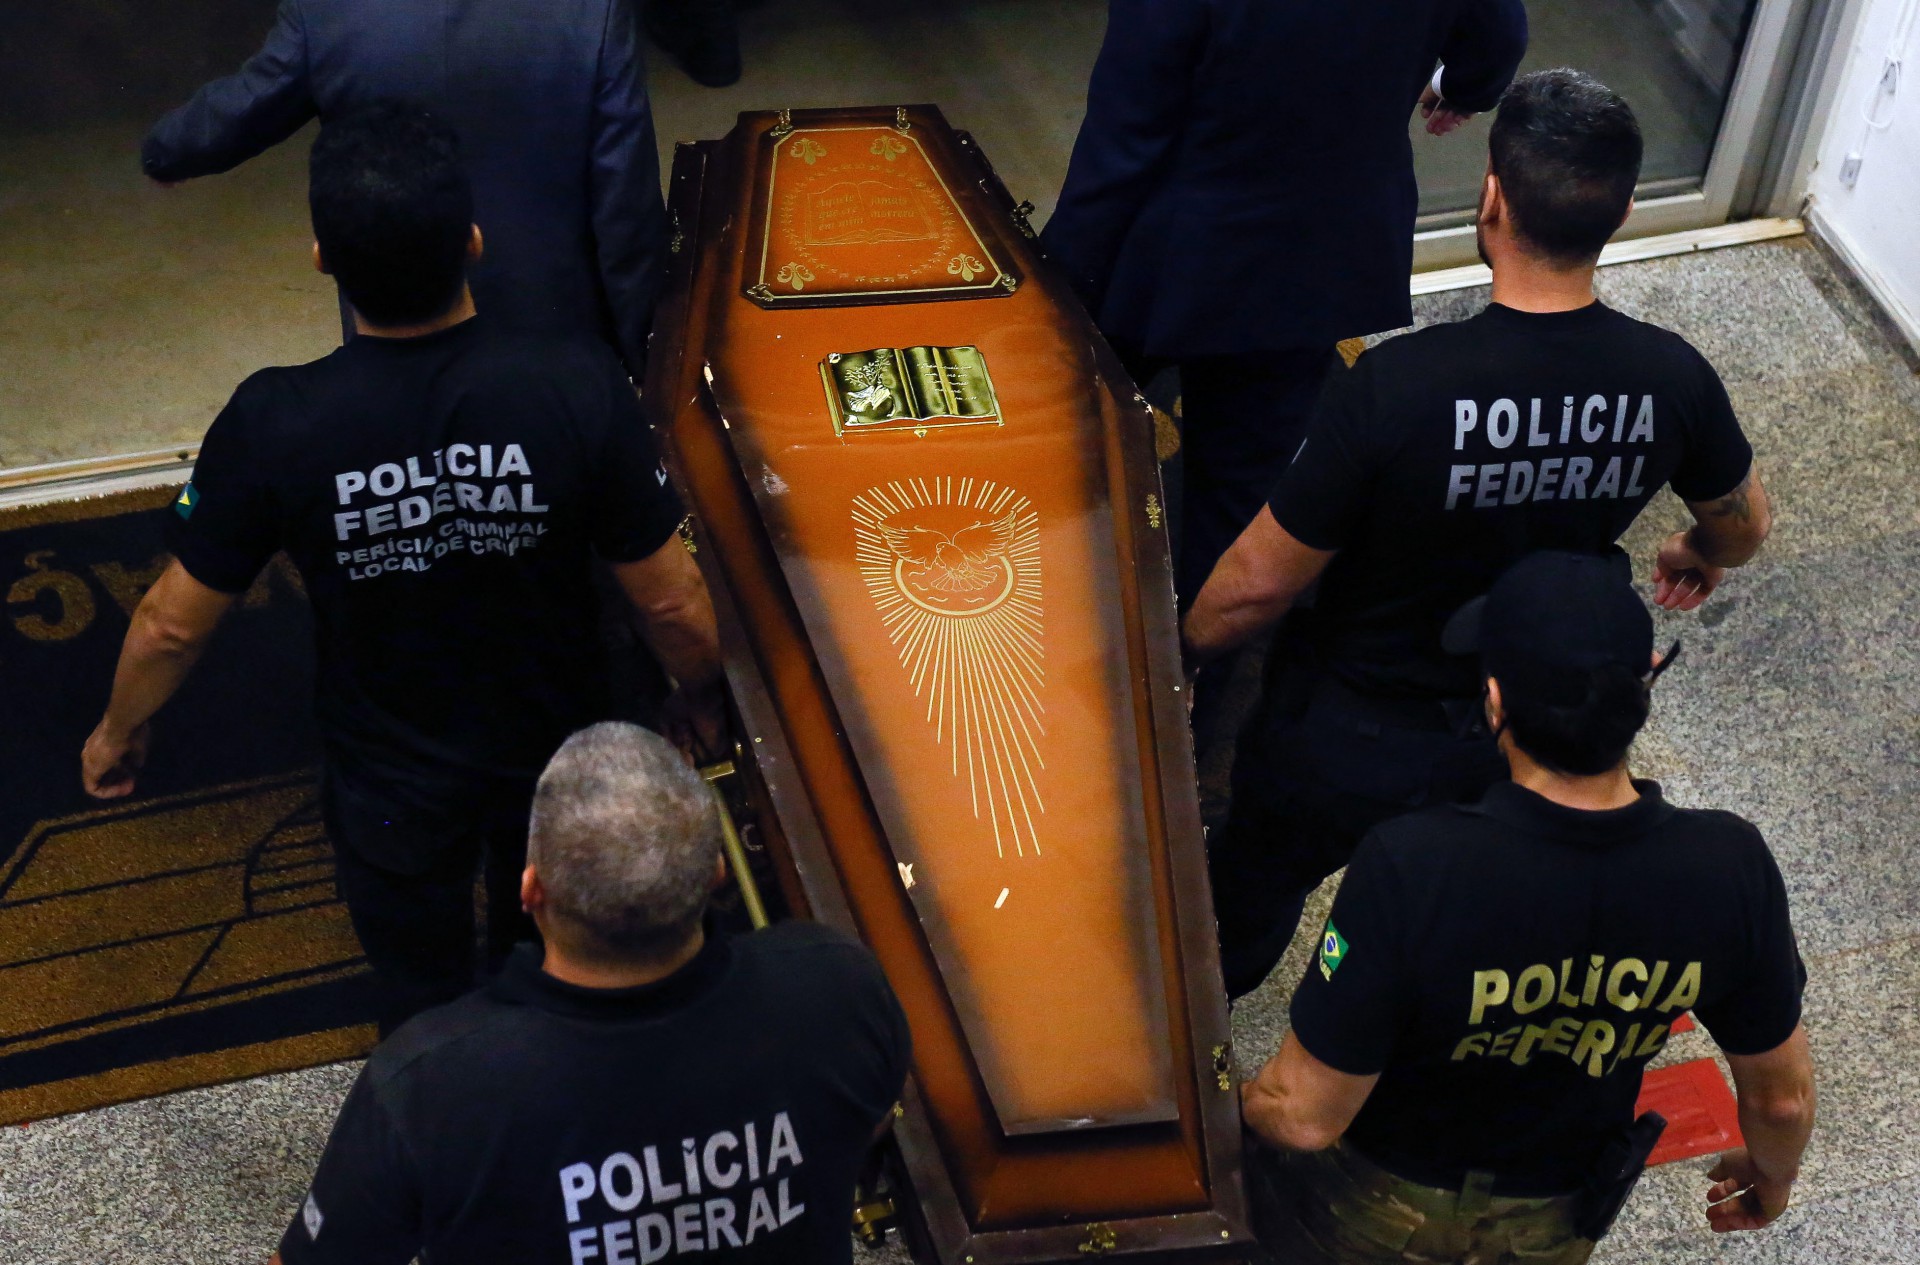 One of the coffins containing human remains found during the search for missing British journalist Dom Phillips and indigenous expert Bruno Pereira in the Amazon forest, is carried upon arrival at the Federal Police hangar in Brasilia on June 16, 2022. - Phillips and Pereira went missing on June 5 in a remote part of the rainforest that is rife with illegal mining, fishing and logging, as well as drug trafficking. On June 15 a suspect in the case took police to a place where he said he had helped bury bodies near the city of Atalaia do Norte, where the two had been headed. Human remains unearthed from the site arrived in Brasilia to be identified by experts. (Photo by Sergio LIMA / AFP)(Foto: SERGIO LIMA/AFP)